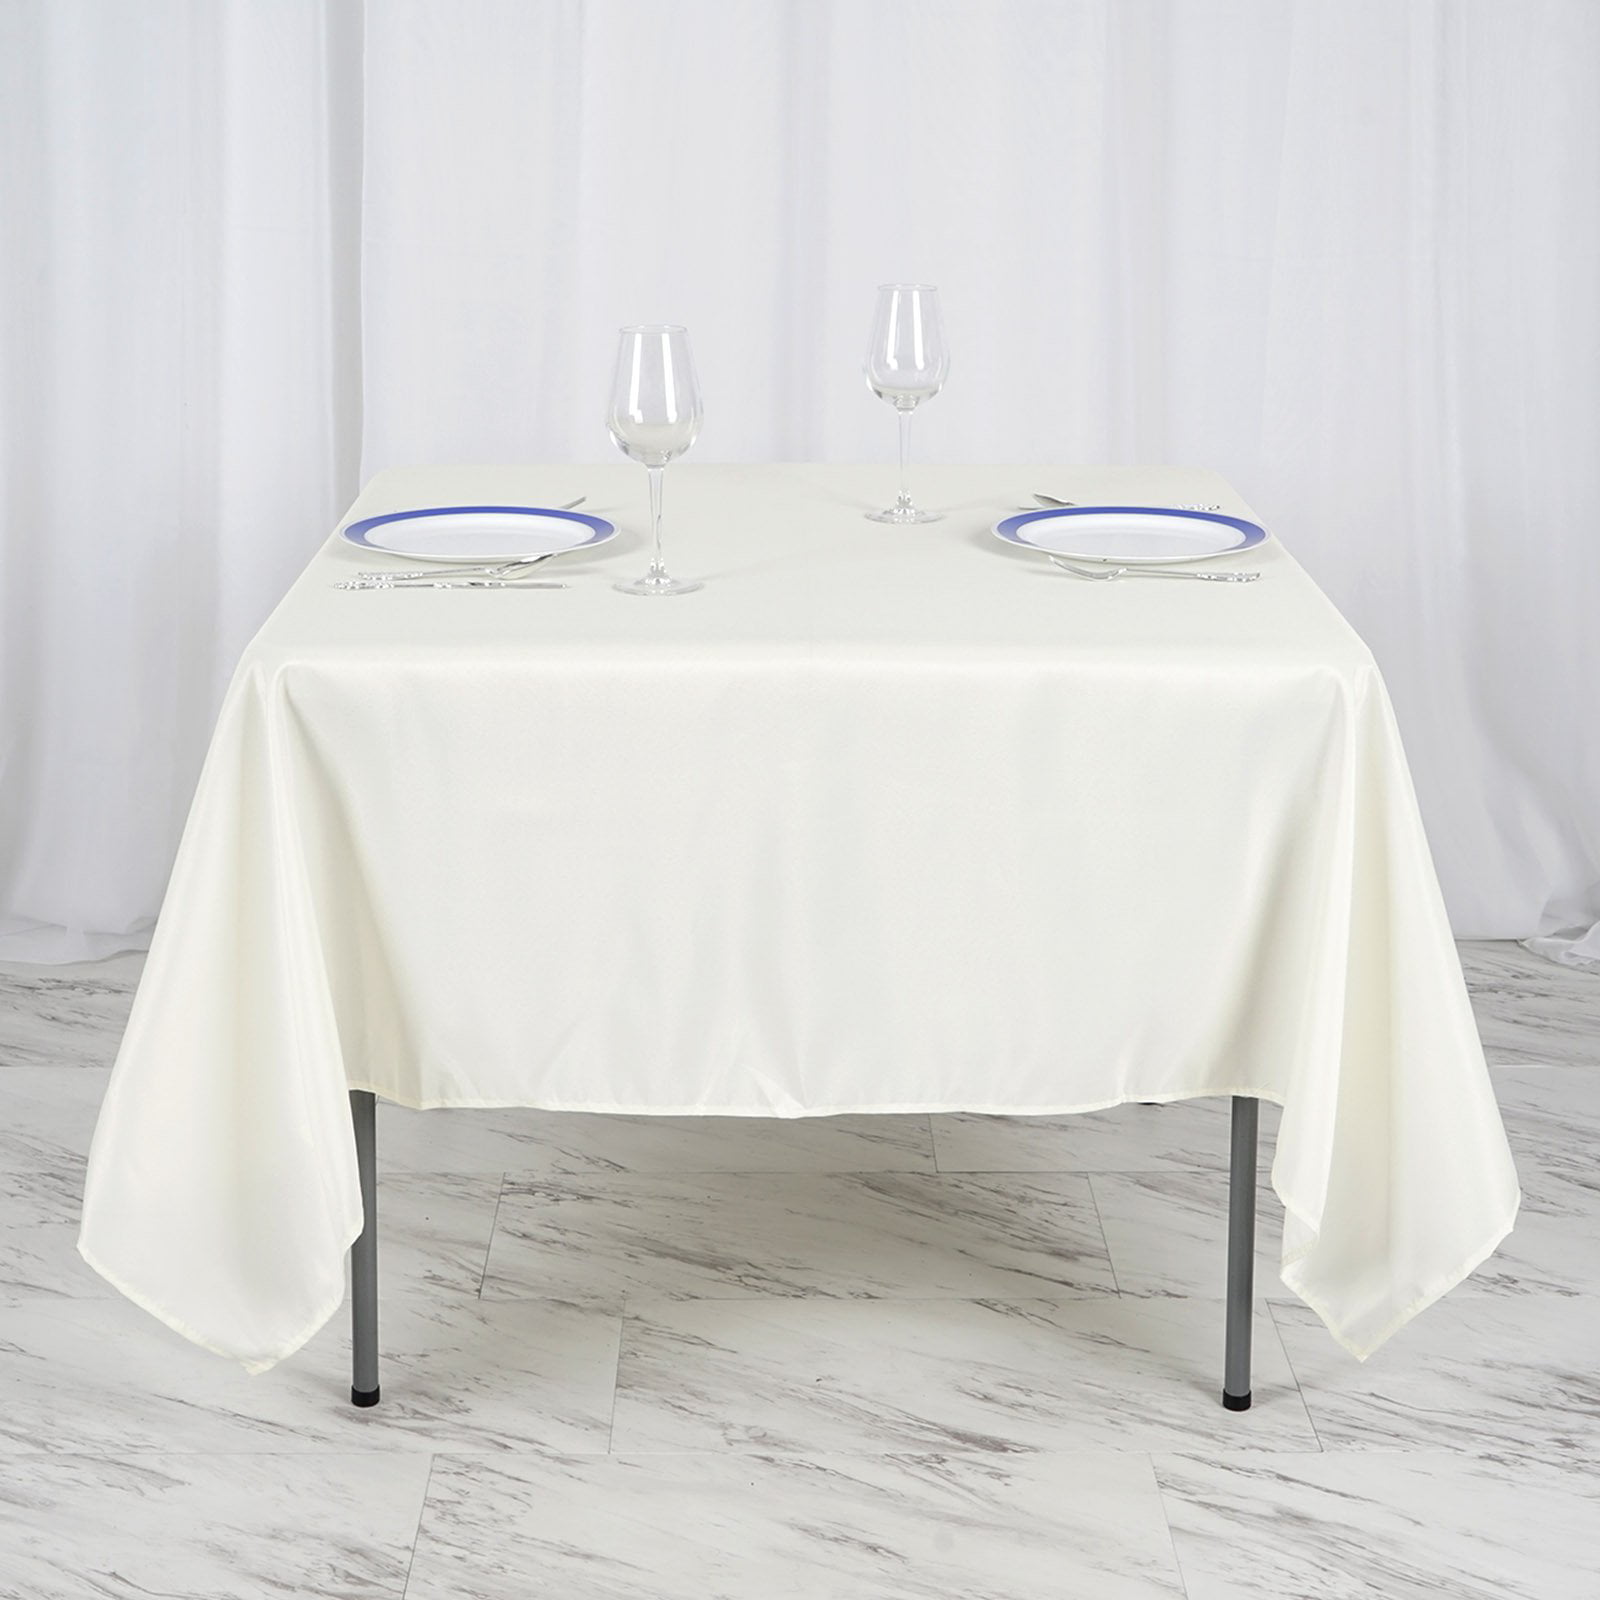 Home Baby Shower Party Rent Tablecloth Square 36" x 36" for Wedding  Restaurant 